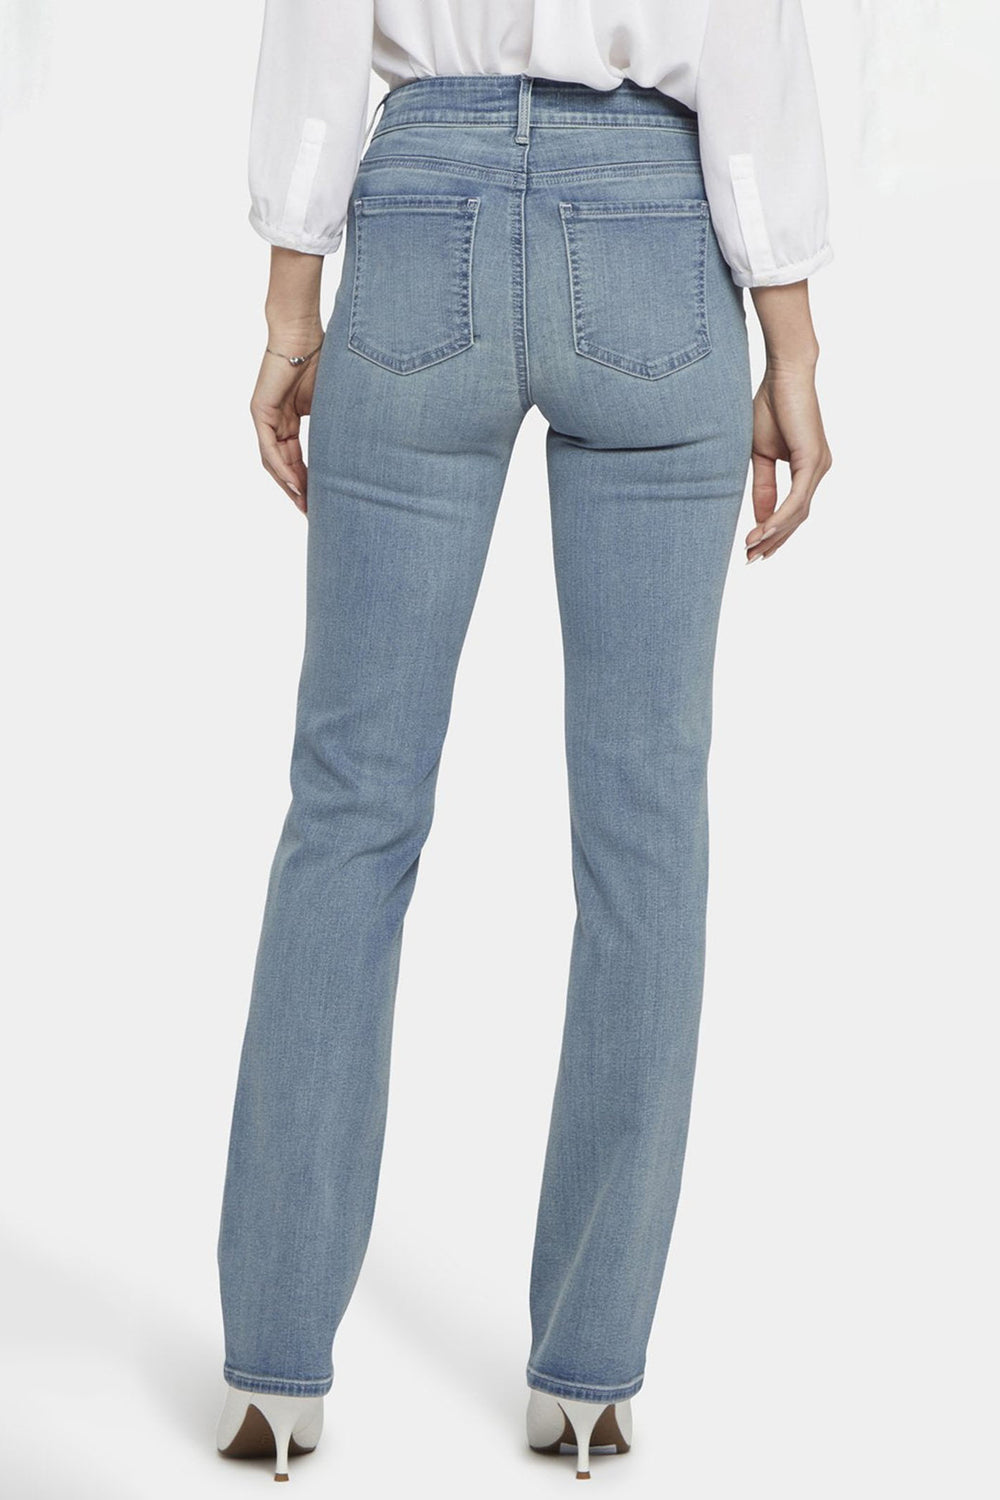 NYDJ MMSLMS2299 Marilyn Straight Thistle Falls Blue Jeans - Shirley Allum Boutique